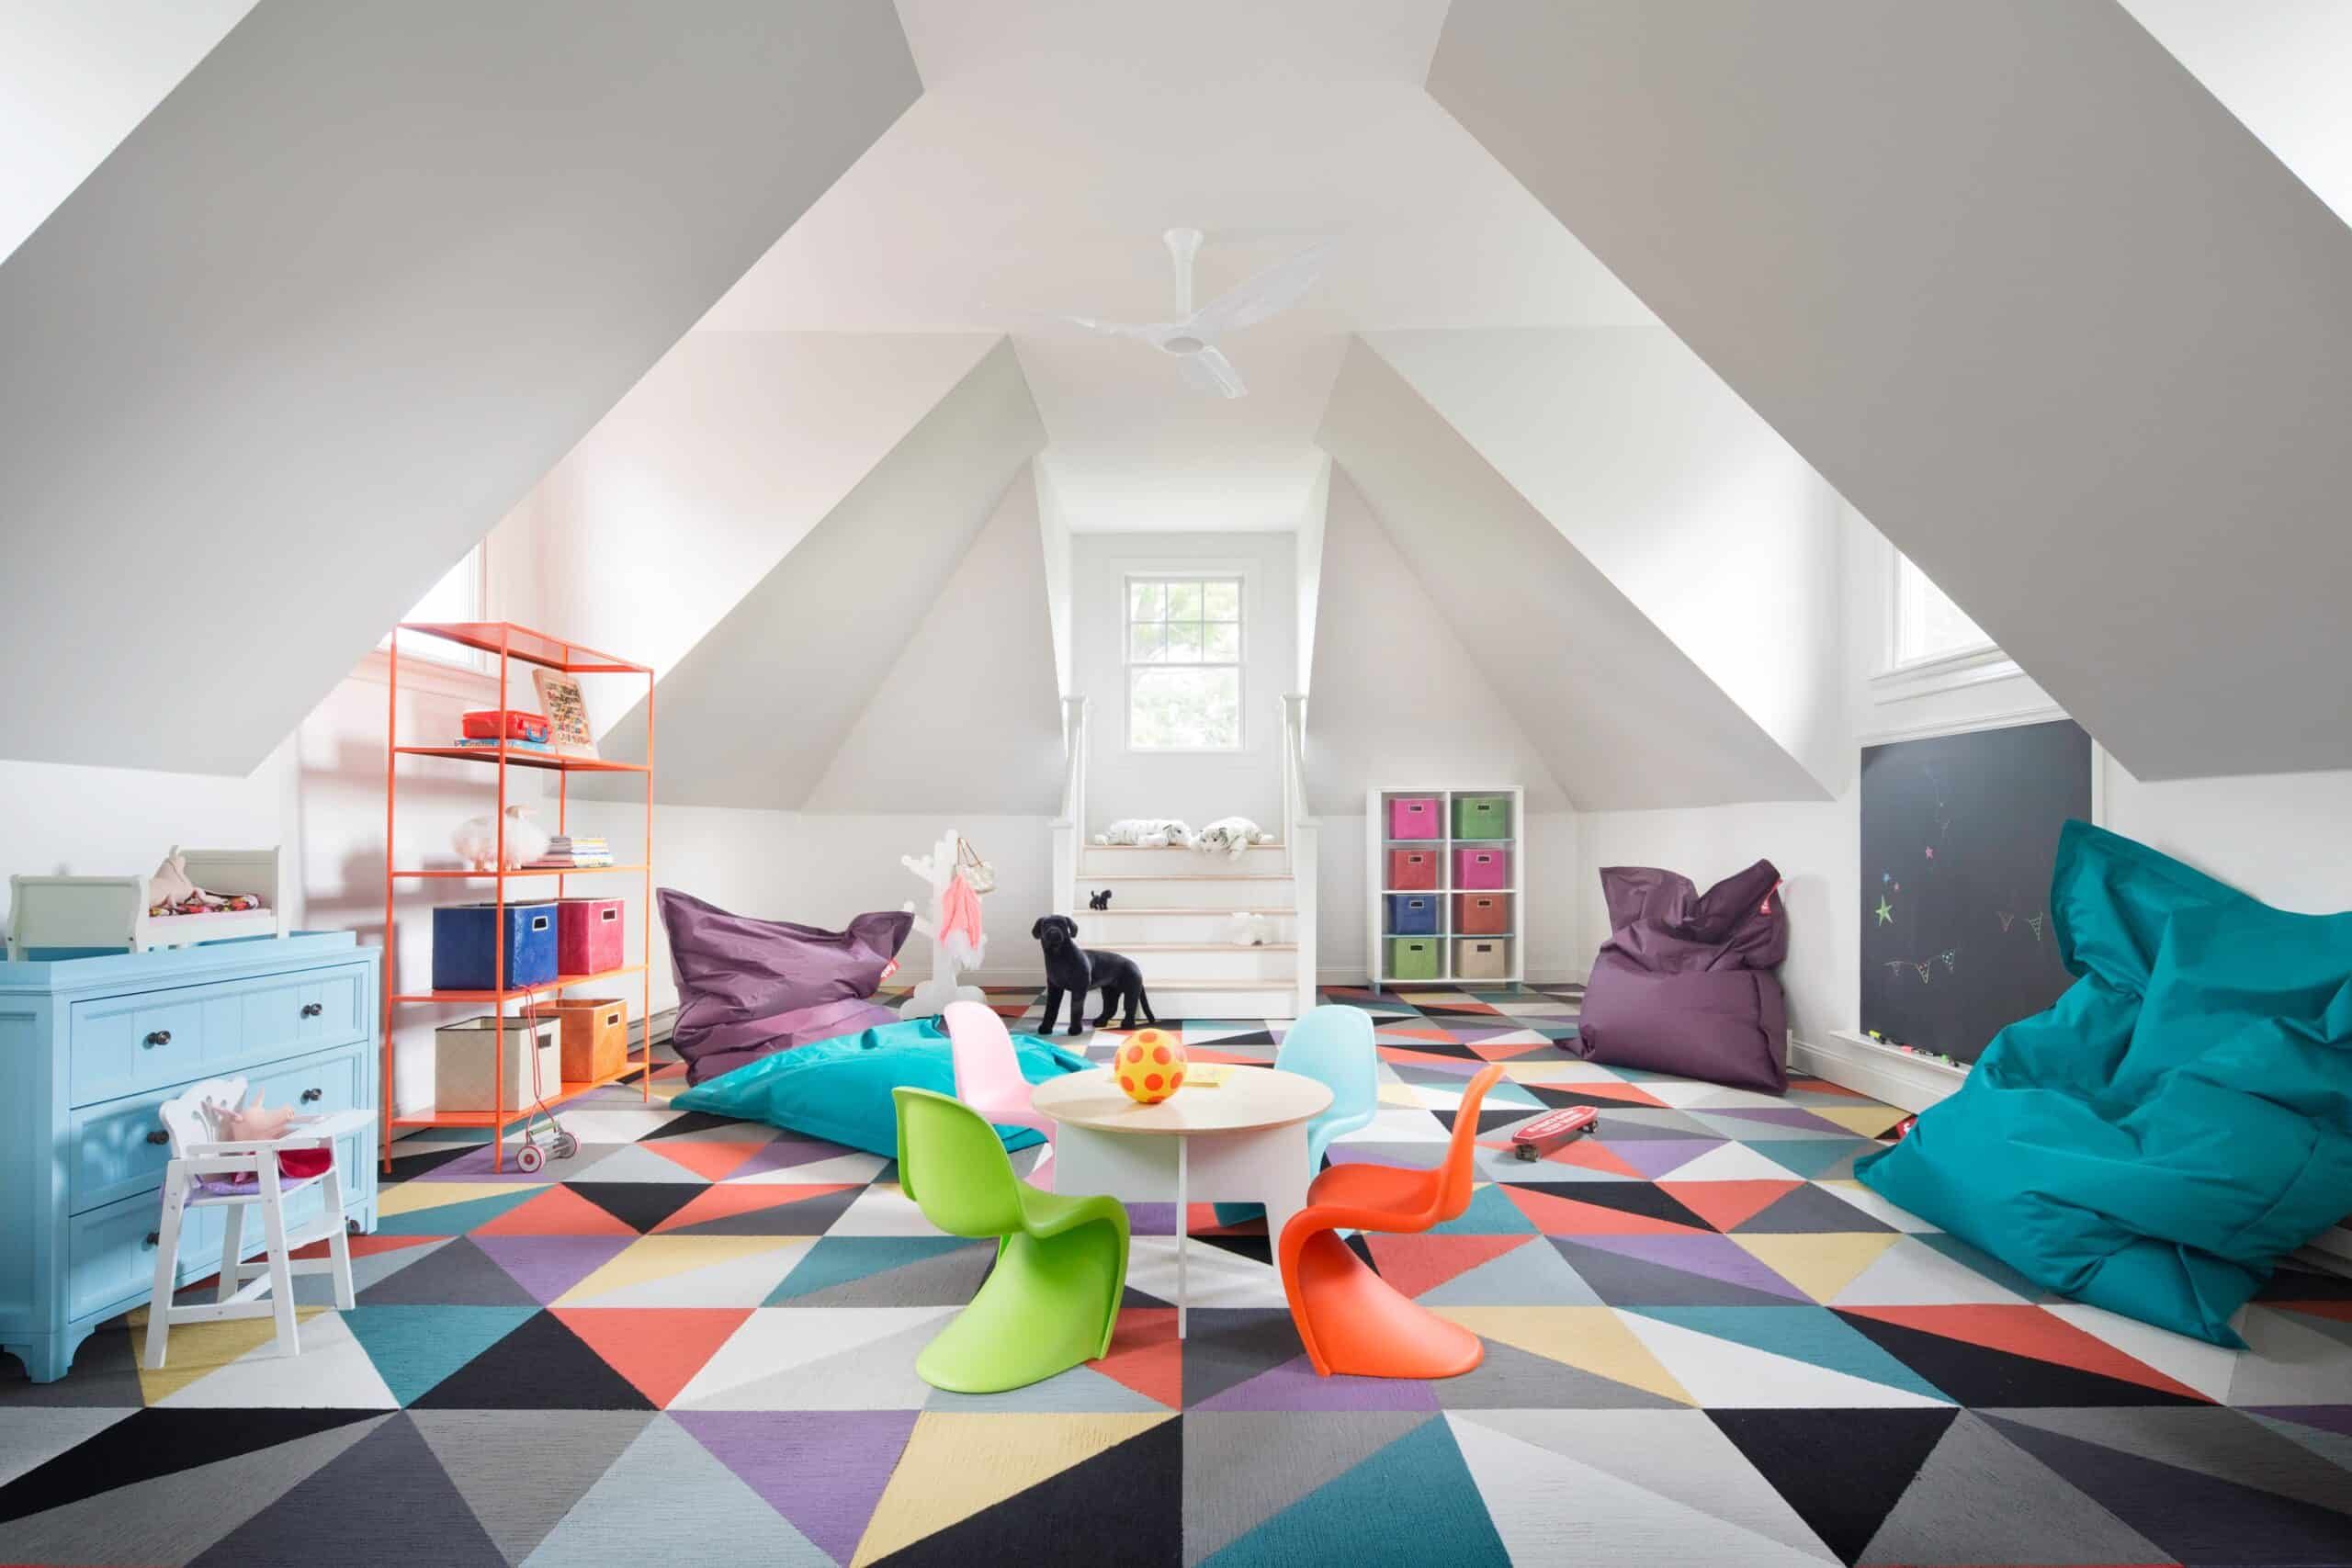 10 Eye-Catching Rooms Decorated with Geometric Patterns